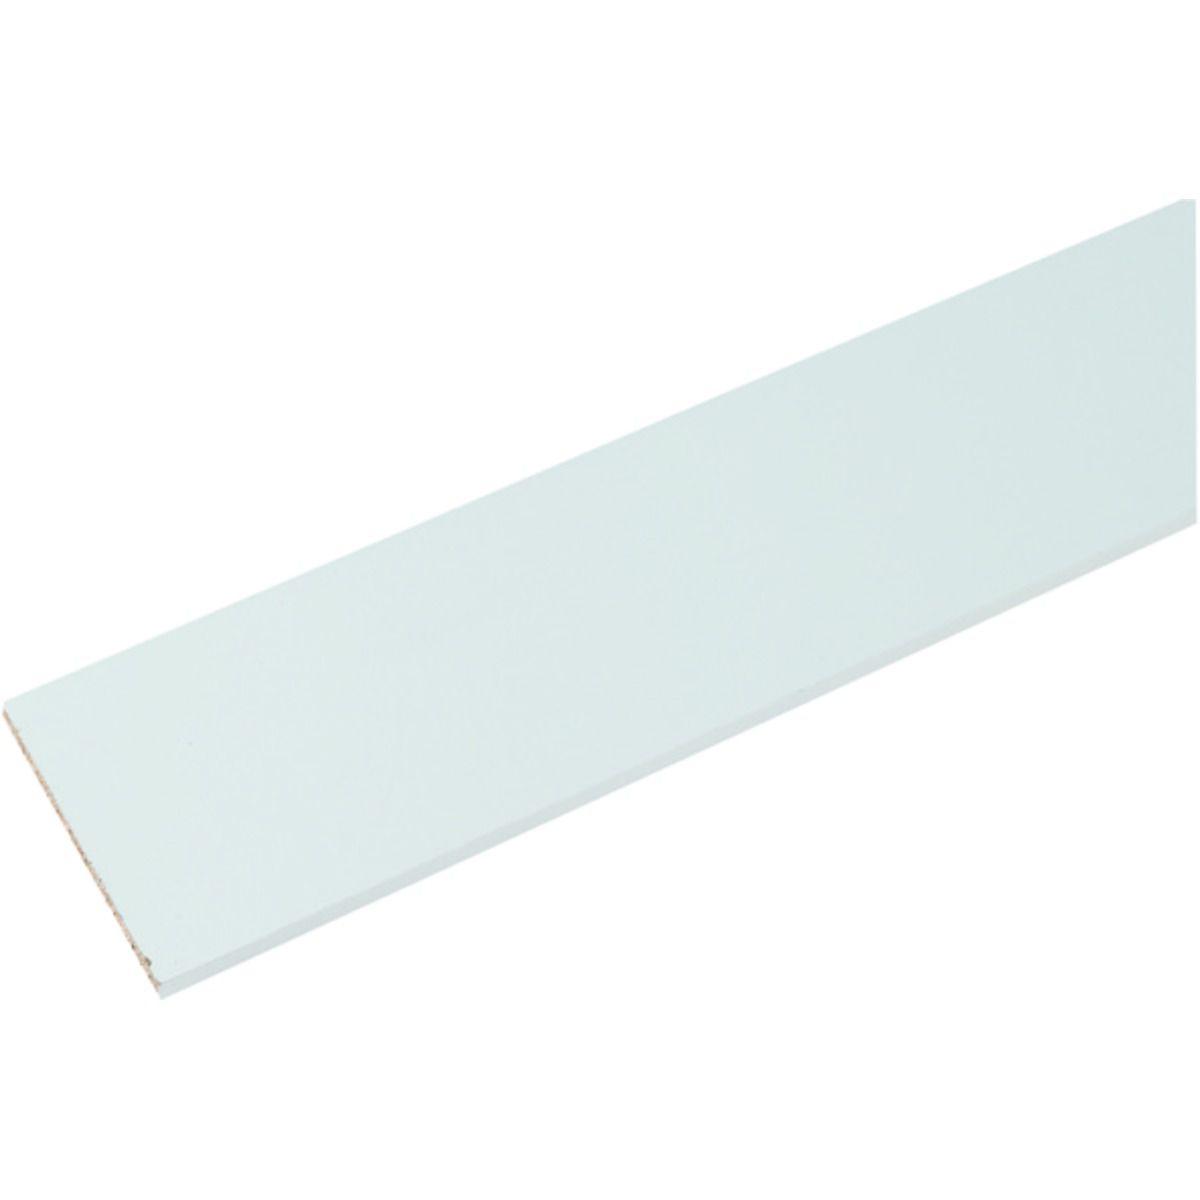 Image of Wickes MFC White Furniture Panel - 15mm x 150mm x 2400mm